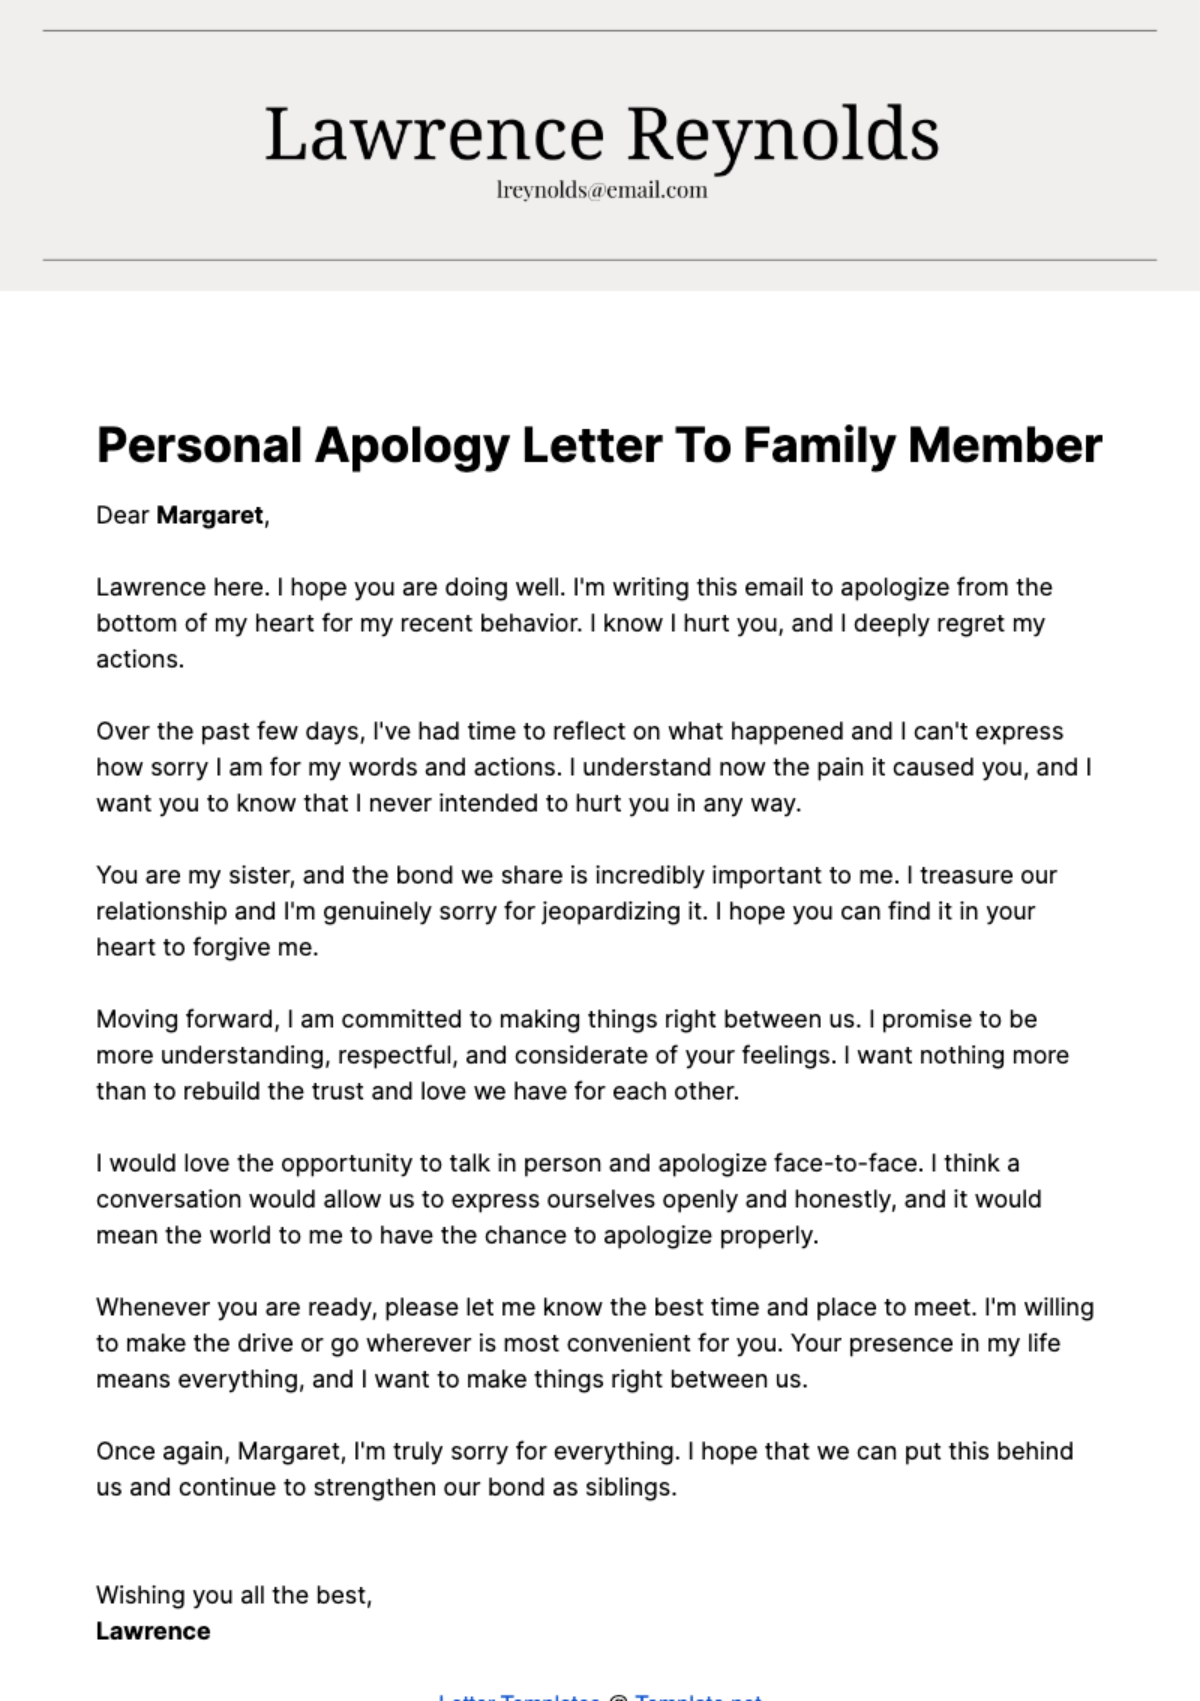 Free Personal Apology Letter to Family Member  Template